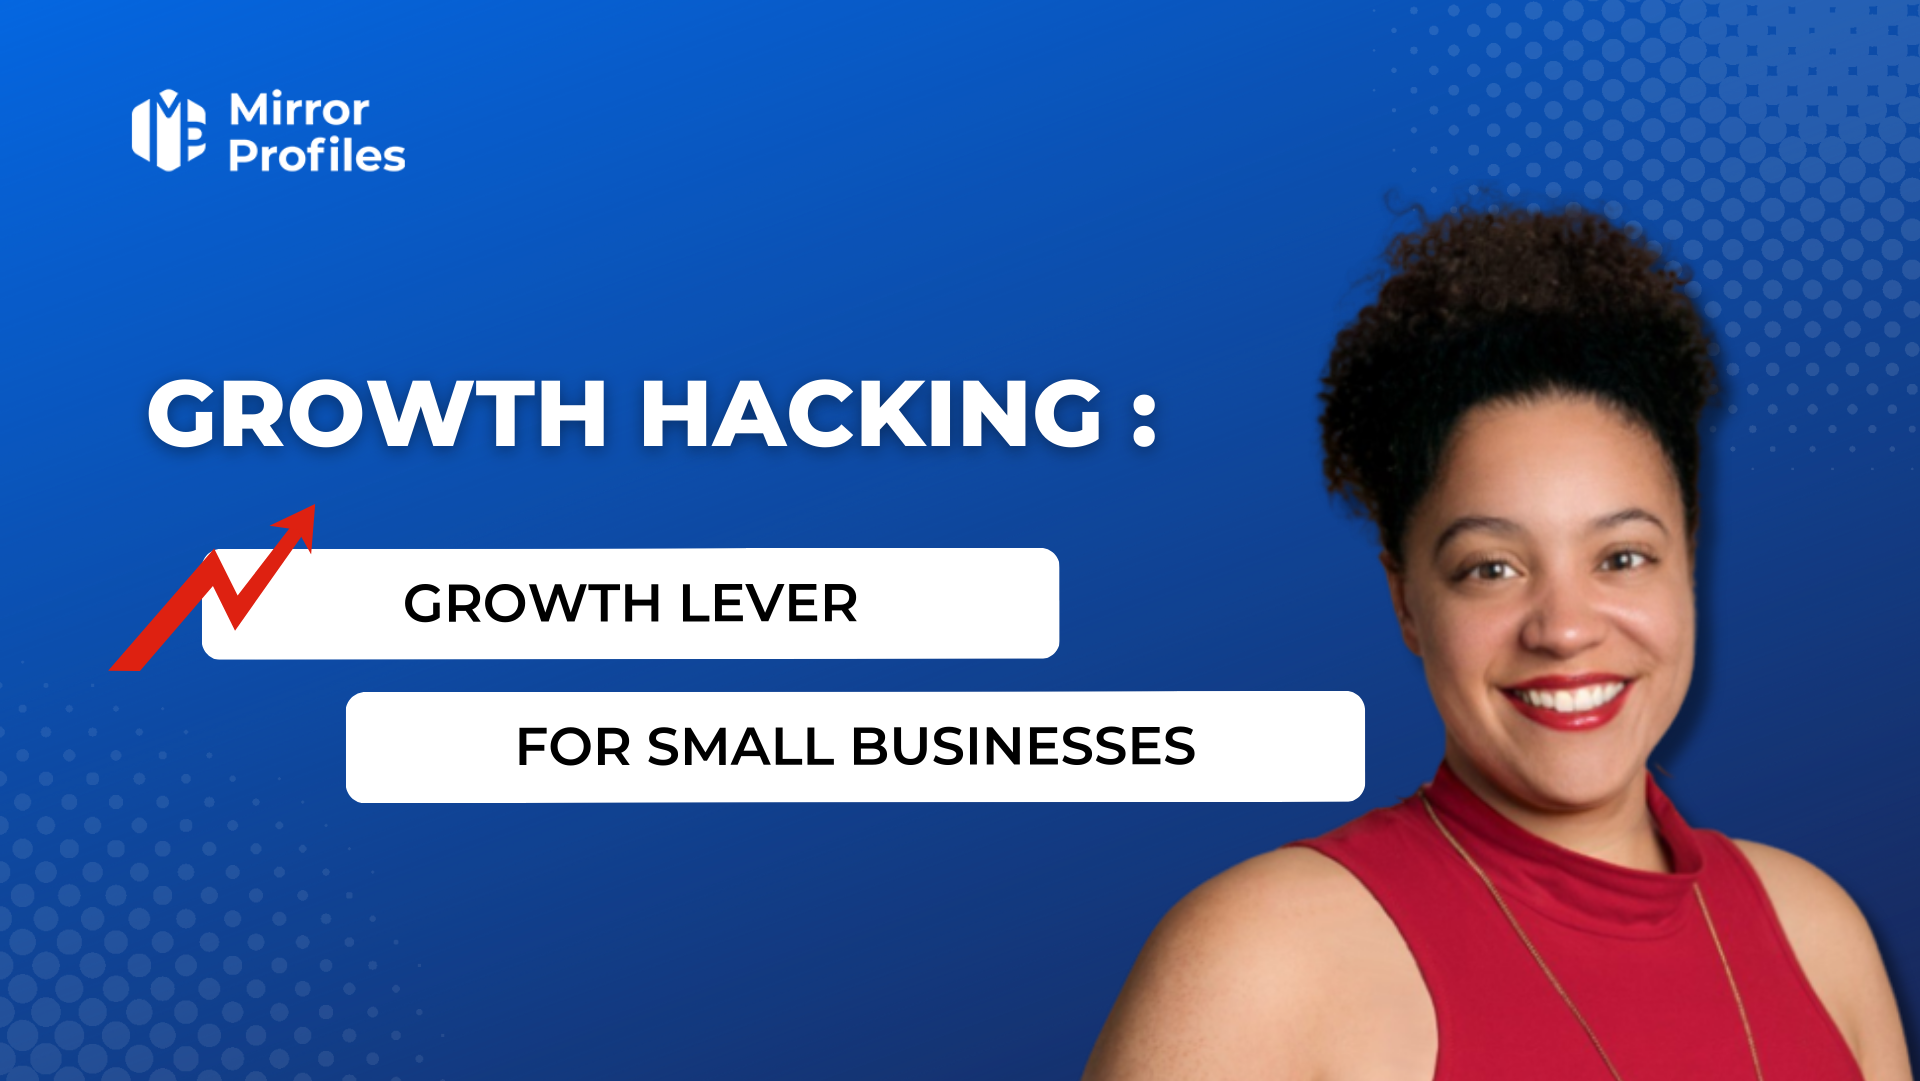 Growth hacking: a growth lever for small businesses